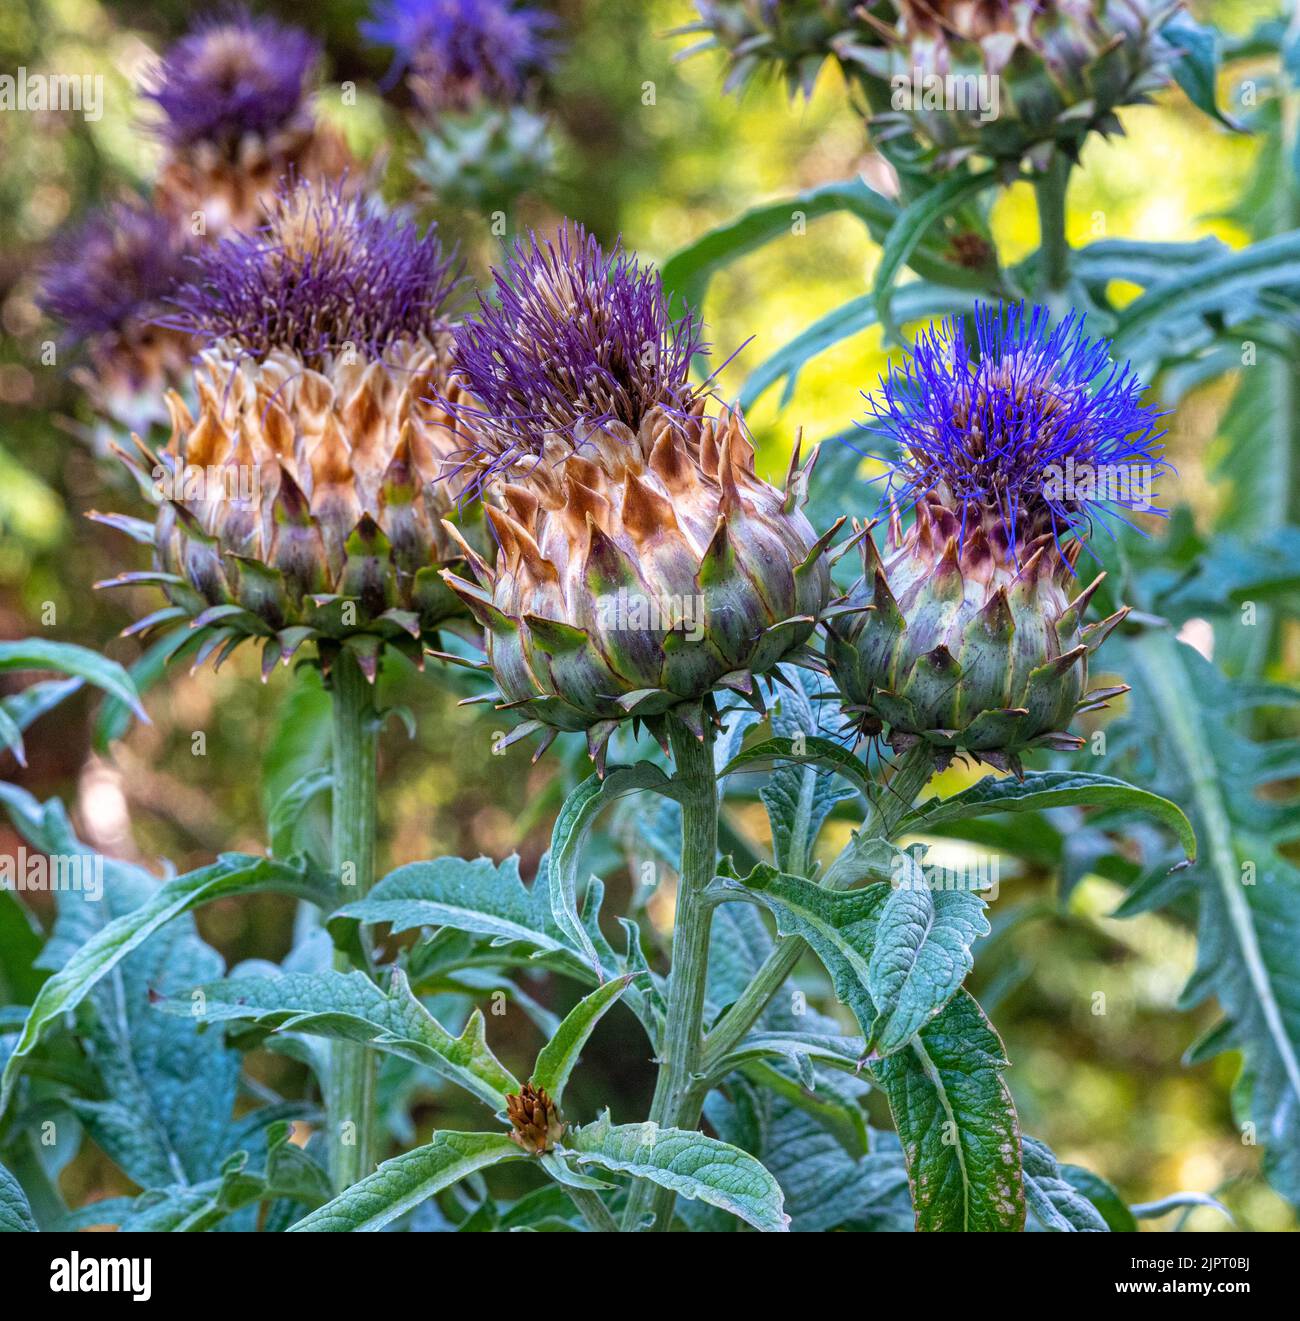 Cardoon, Cynara cardunculus. Head in full flower. Flowers are tiny purple strands surrounded by green. Stock Photo